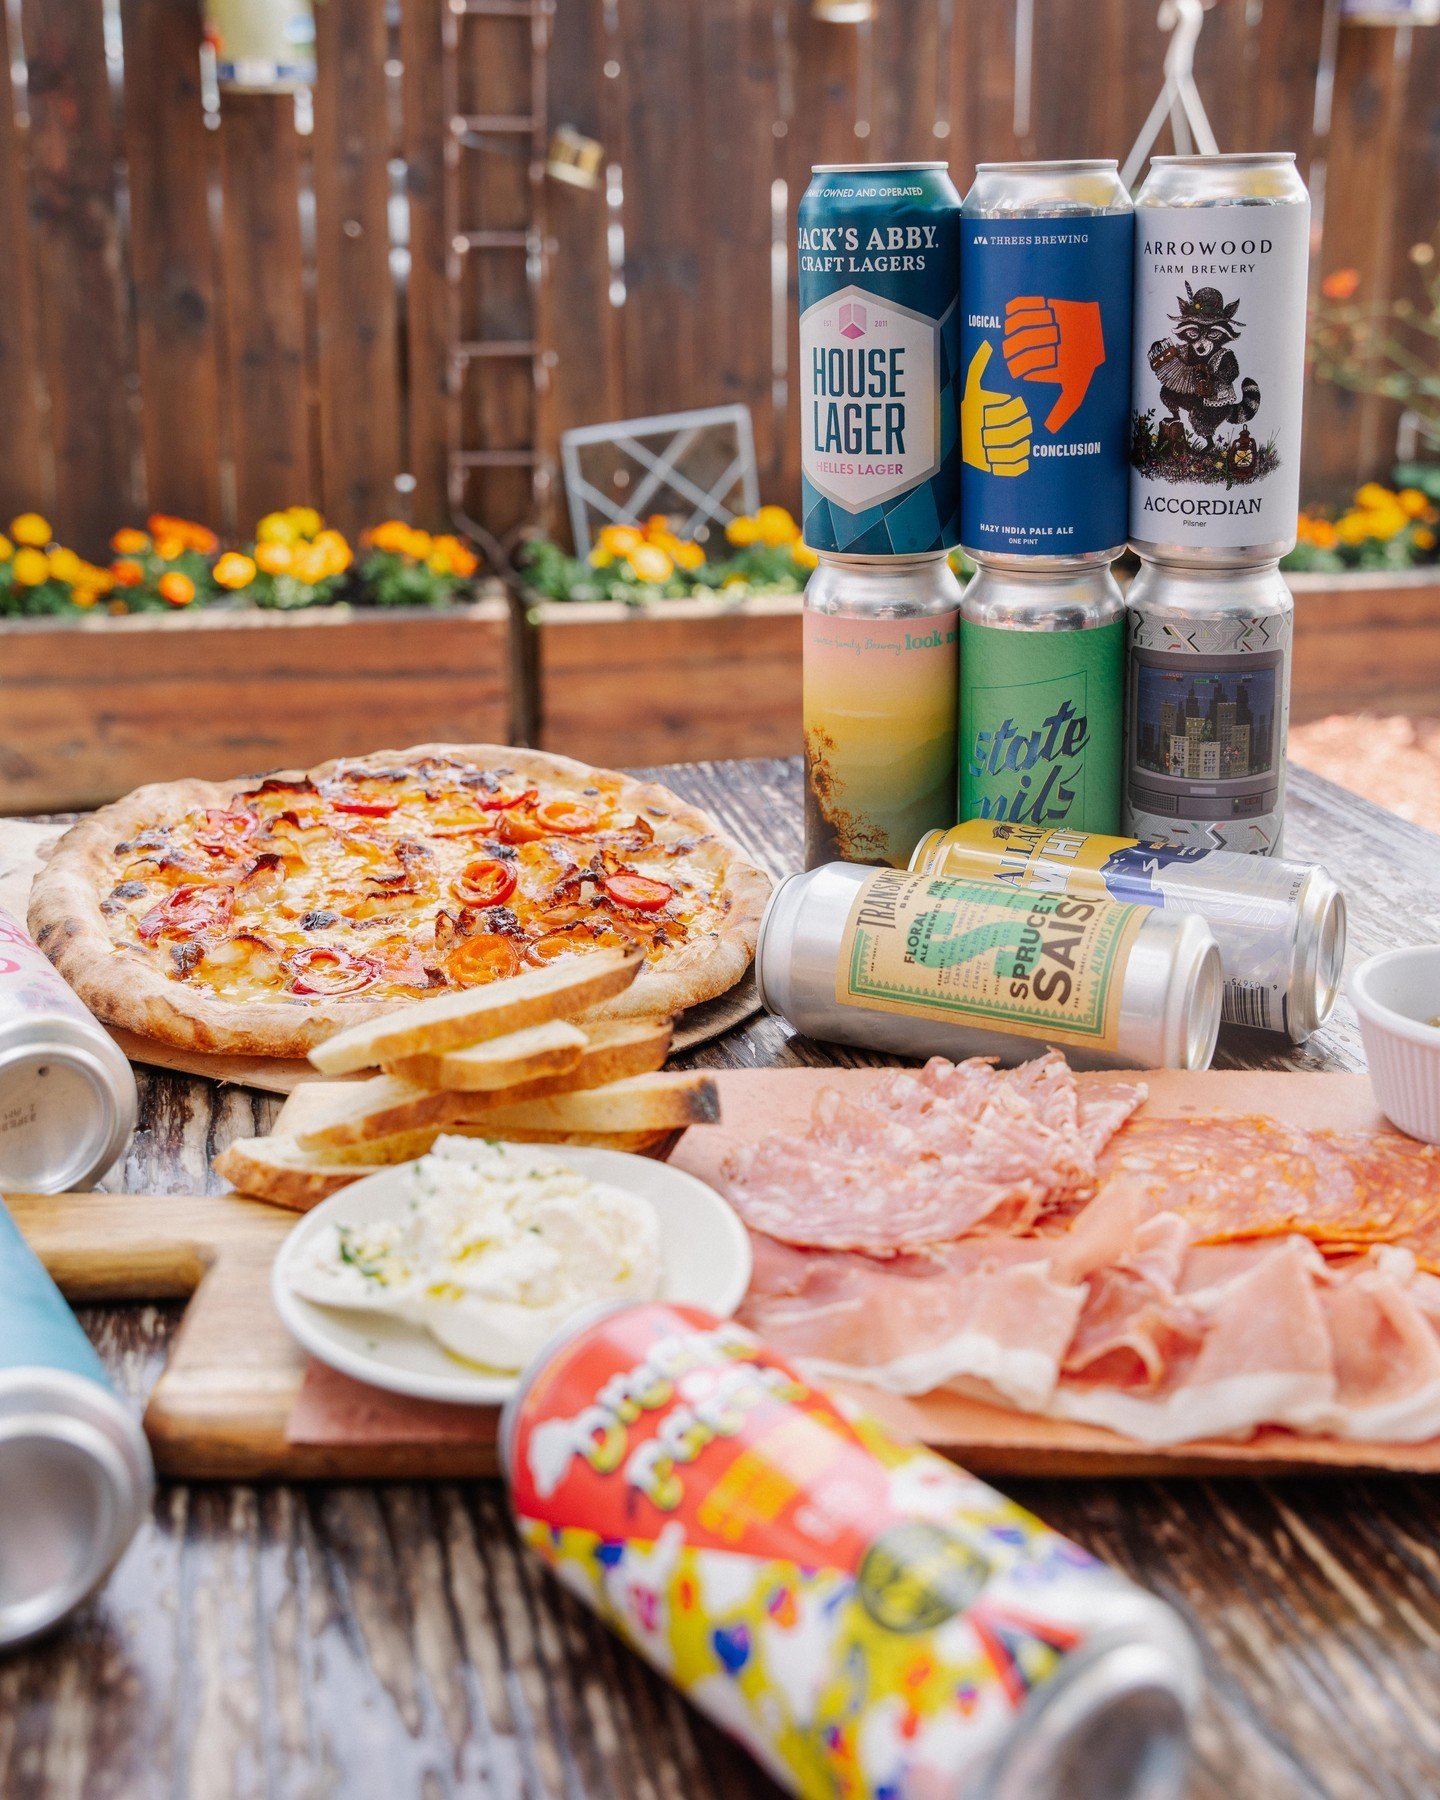 Slide into the weekend with our ultimate game day spread as the Mets take on the Rays &amp; the Yankees challenge the Tigers!
&bull;
&bull;
#kingsbridgesocialclub #kingsbridge #pizza #pizzalovers #bronx #bronxny #newforkcity #nyceats #nycfoodie #ital